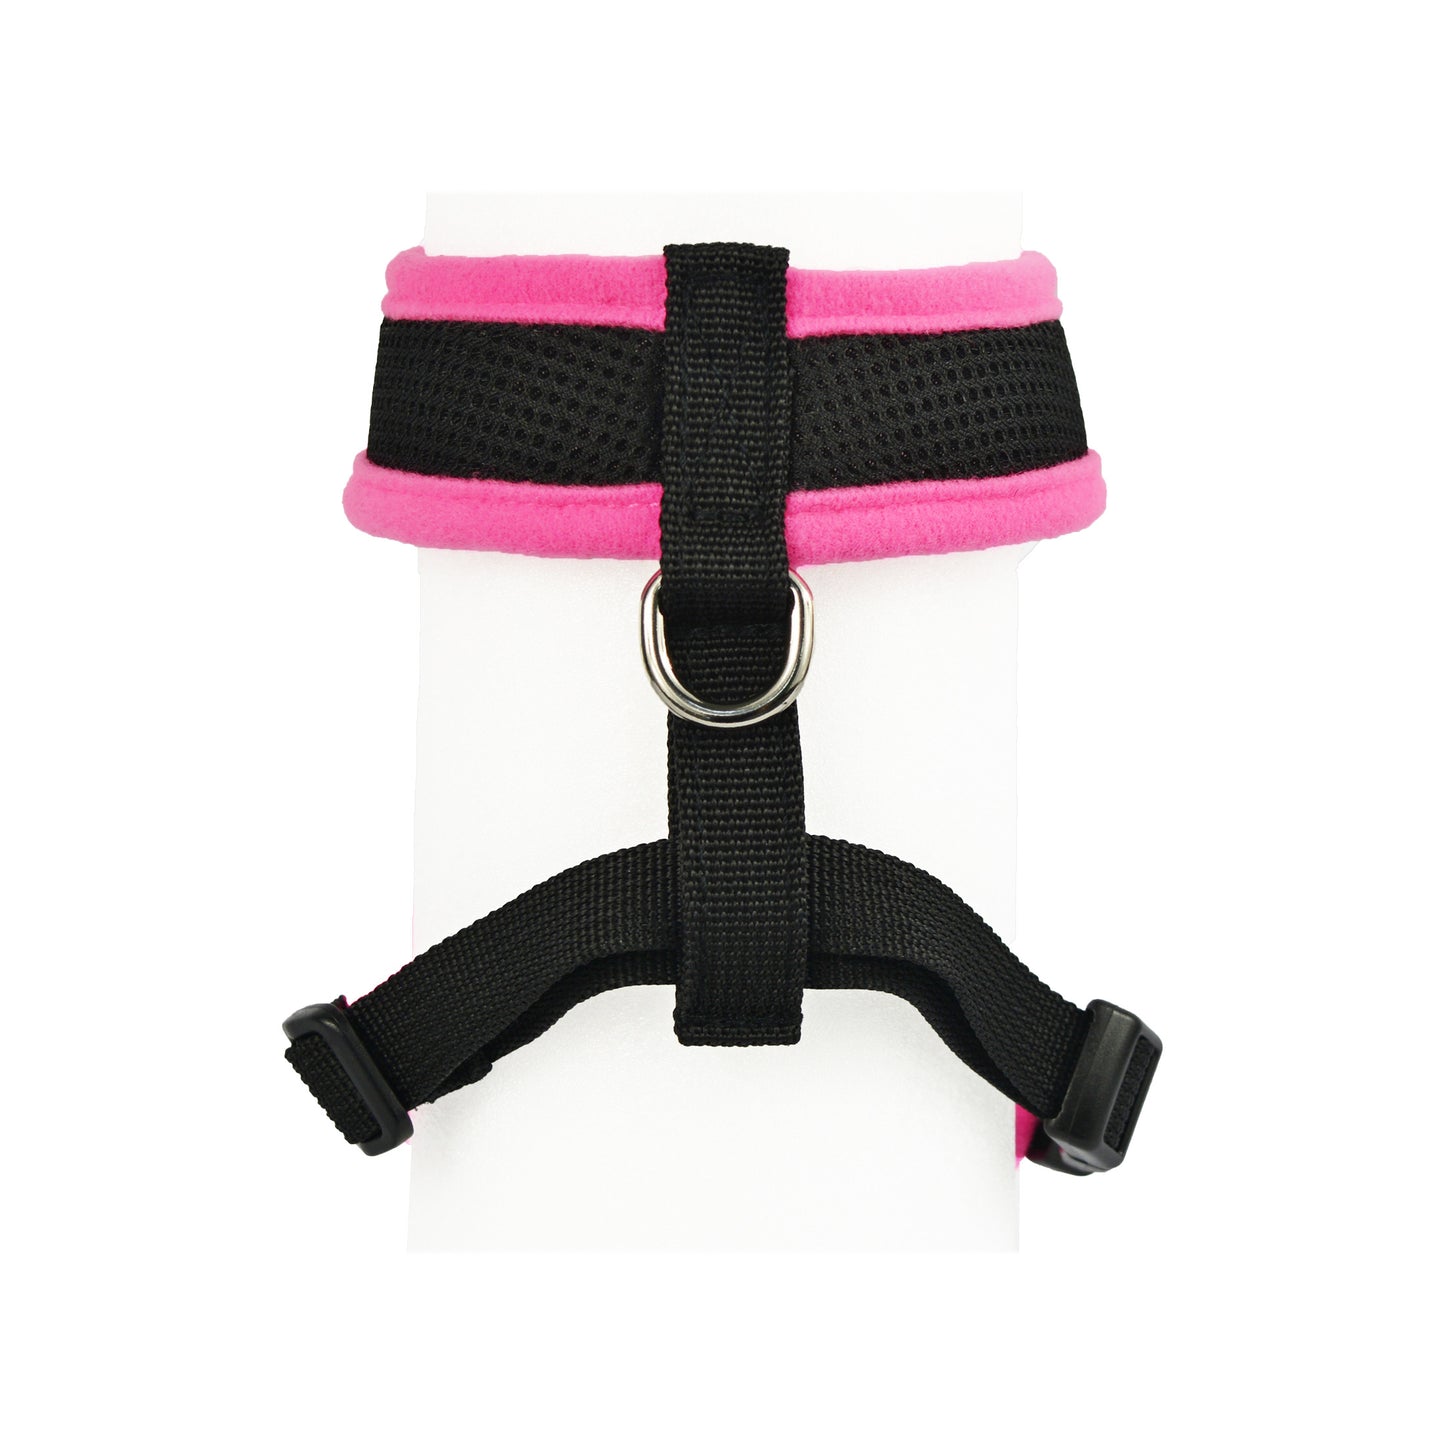 Mimetin Soft Pet Harness with Leash Adjustable Walking Pet Harness, Pink, S (14" to 19" Chest Size) 2 Piece Set